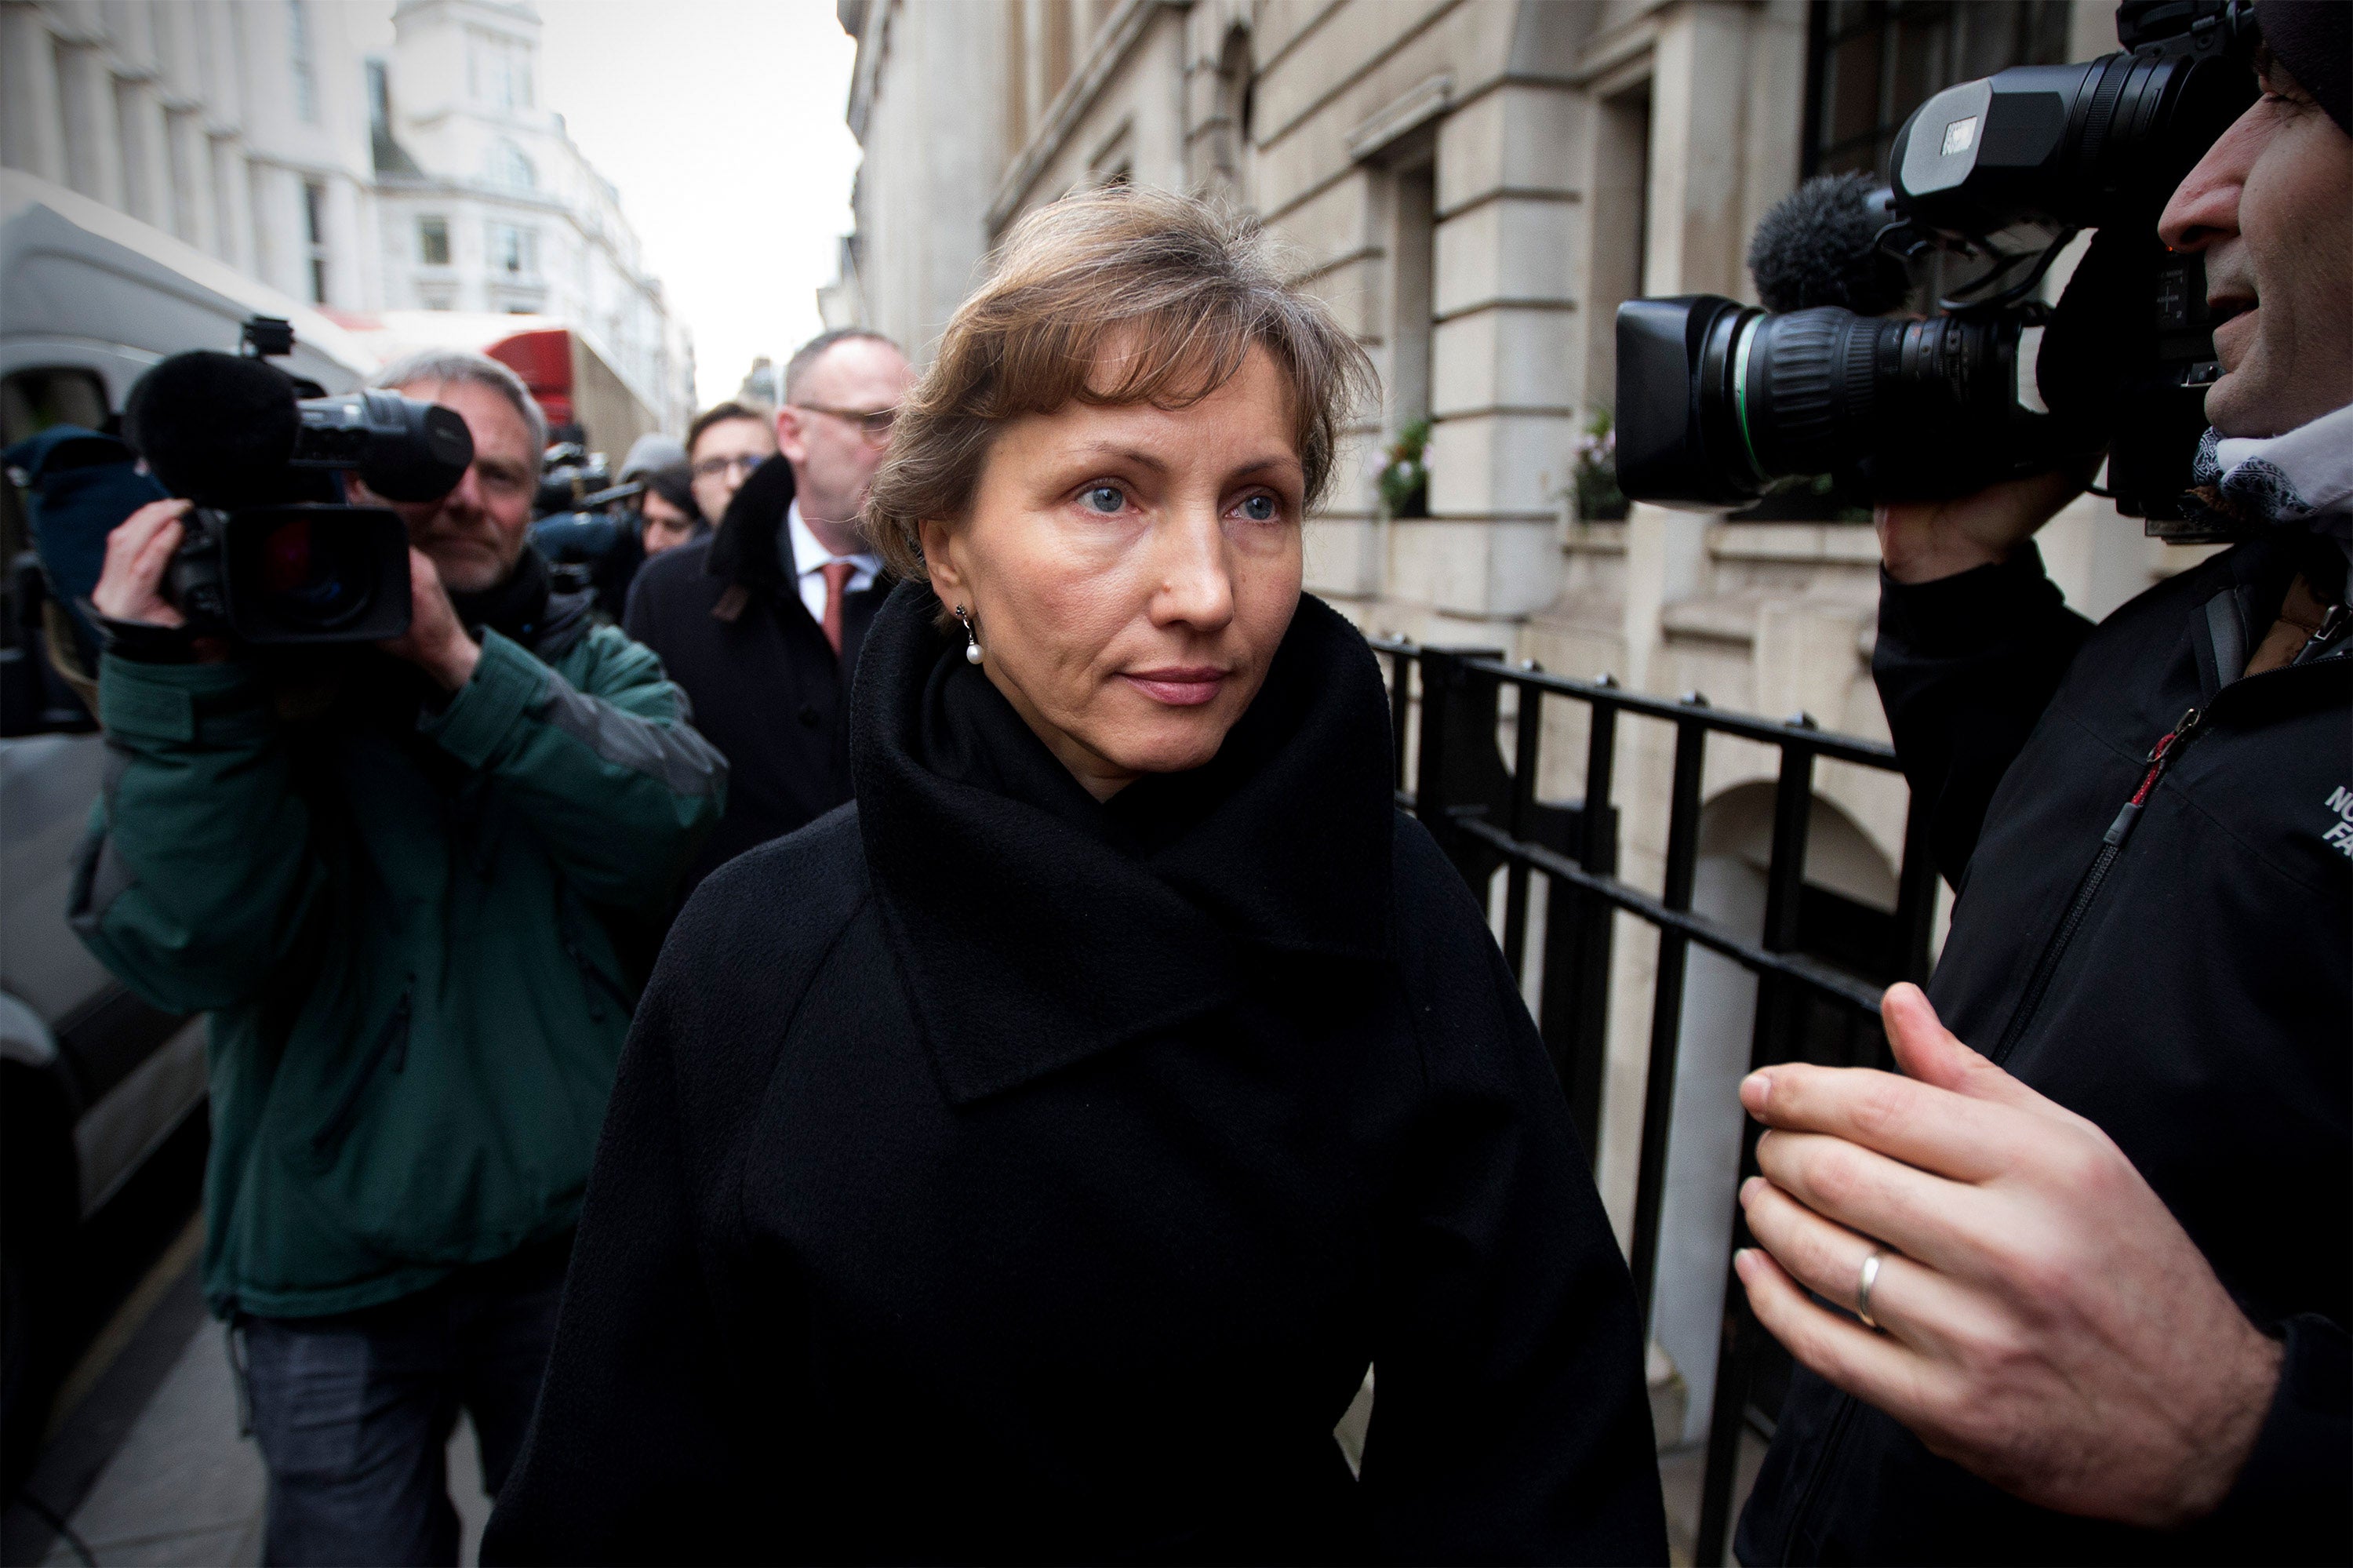 Marina Litvinenko, the widow of former KGB agent Alexander Litvinenko, leaving high court after attending the first day of the inquiry into her husband’s death